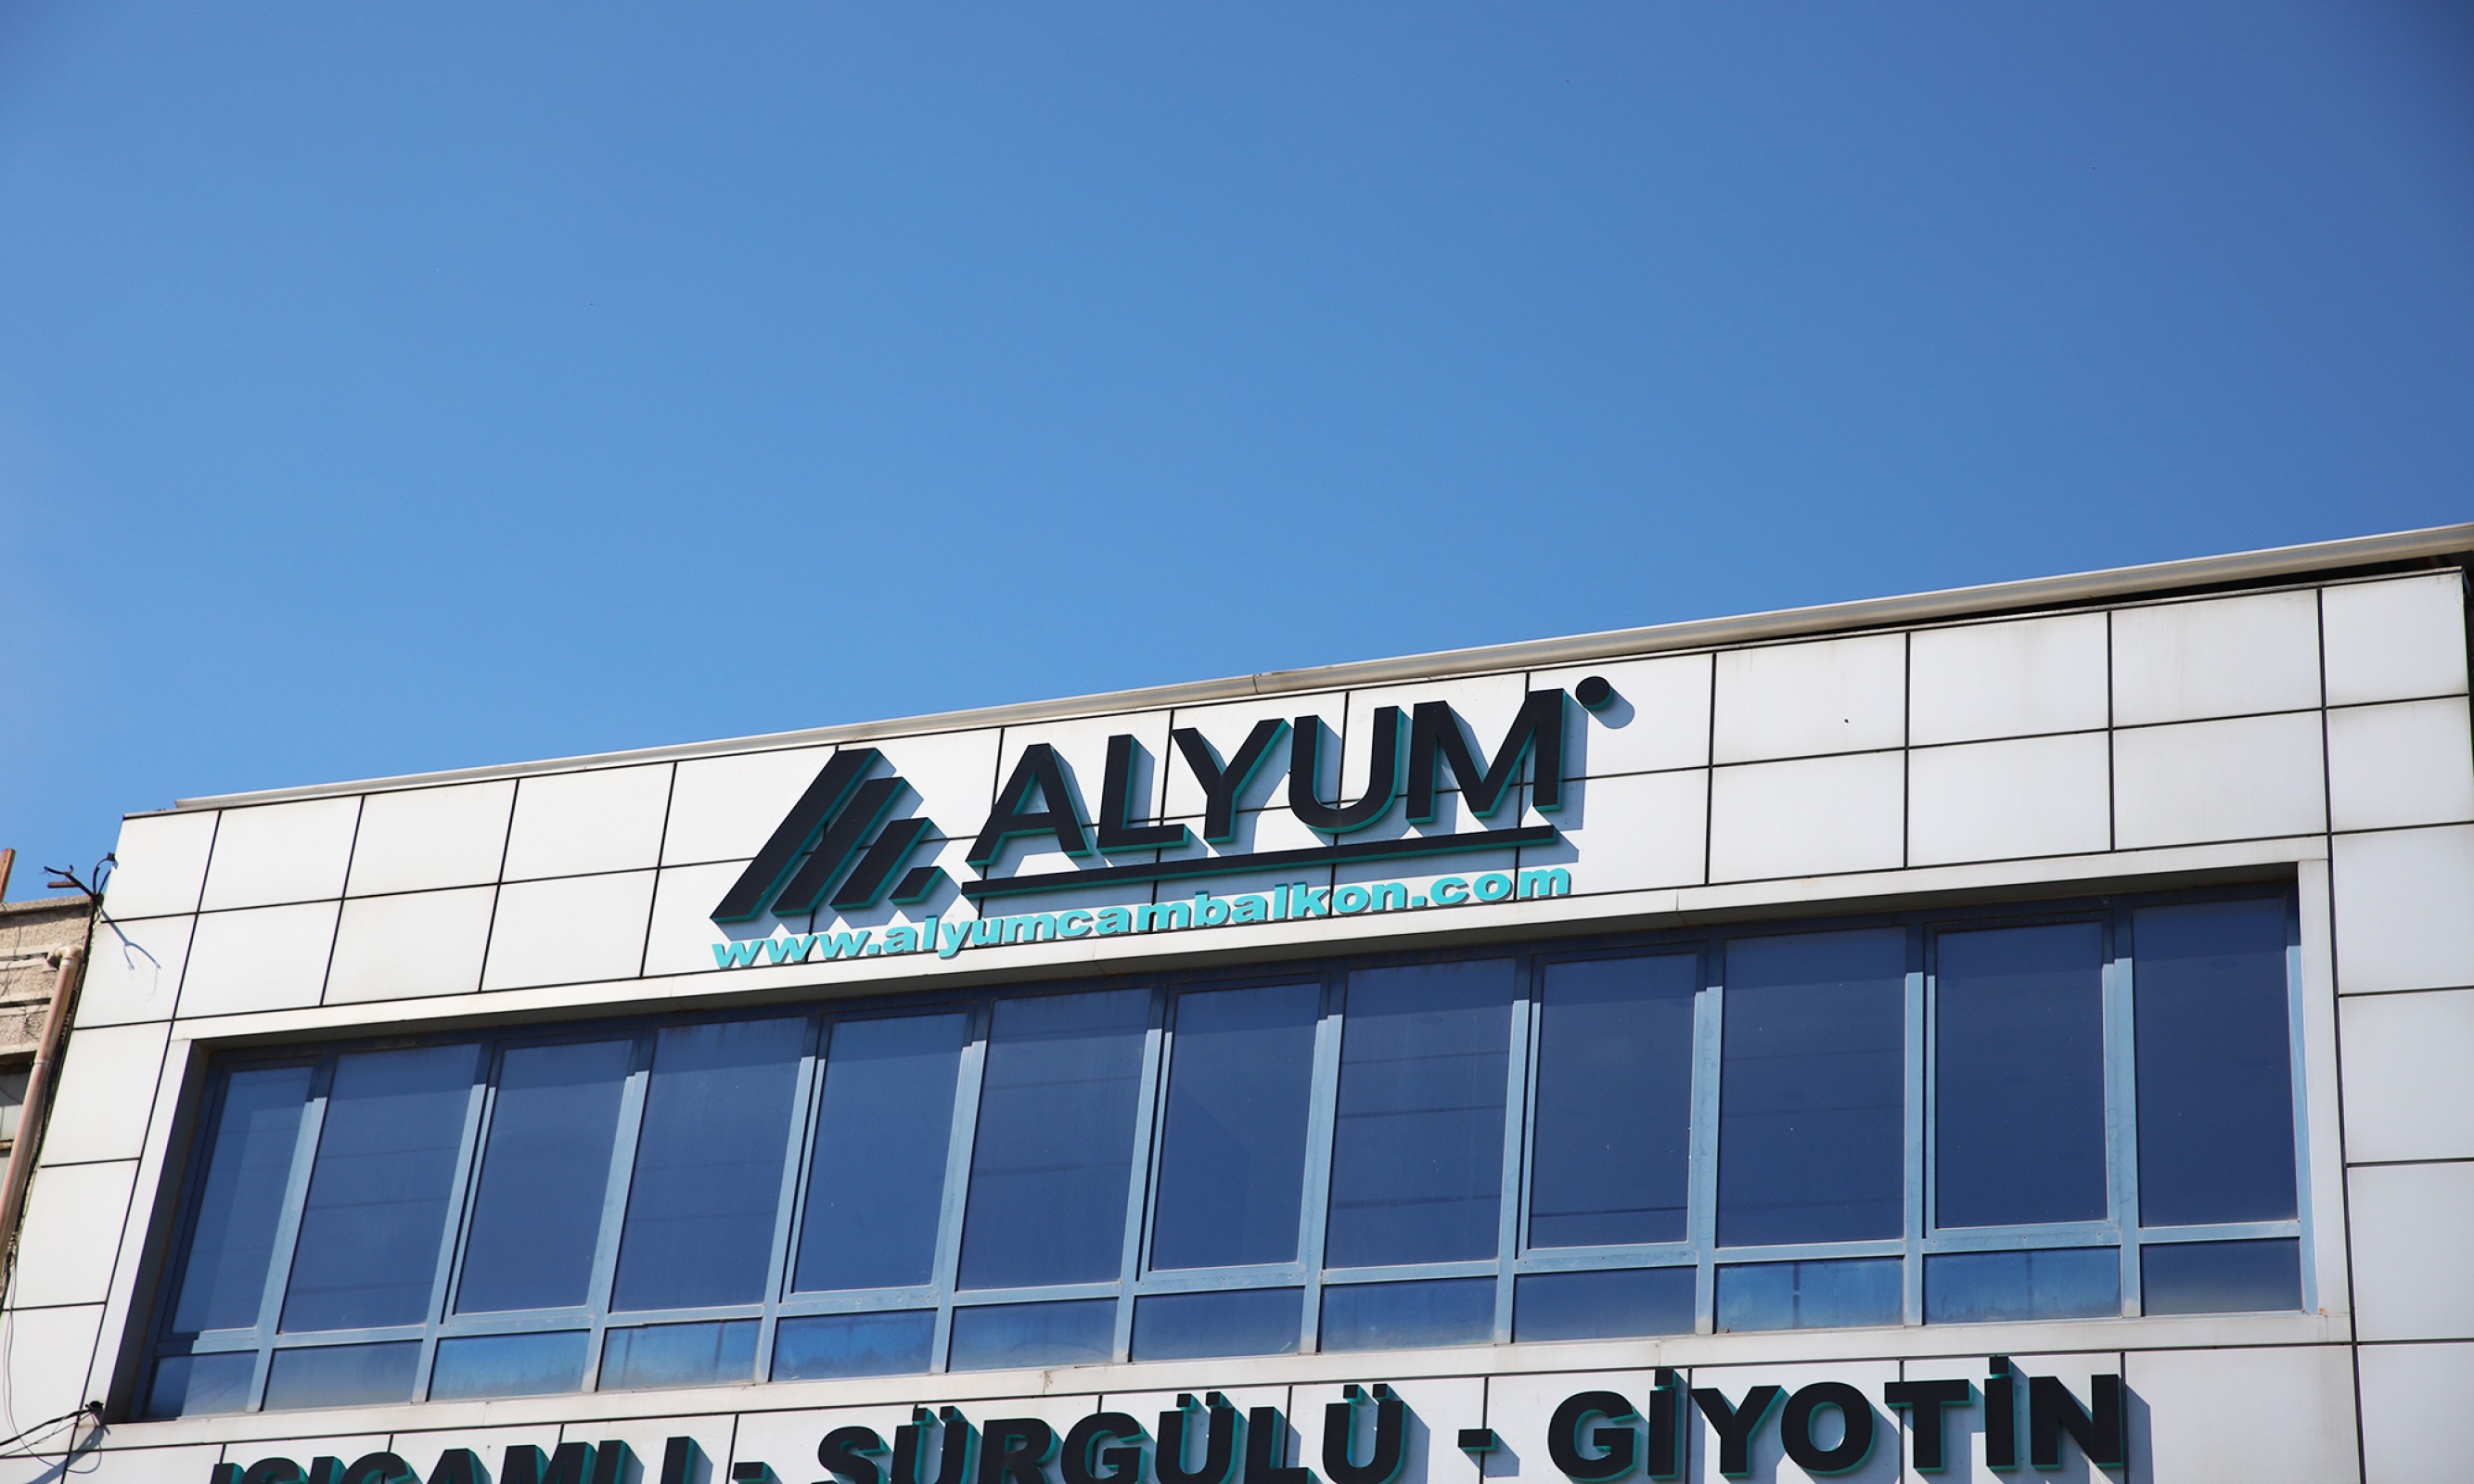 10 Reasons to Prefer Alyum Products